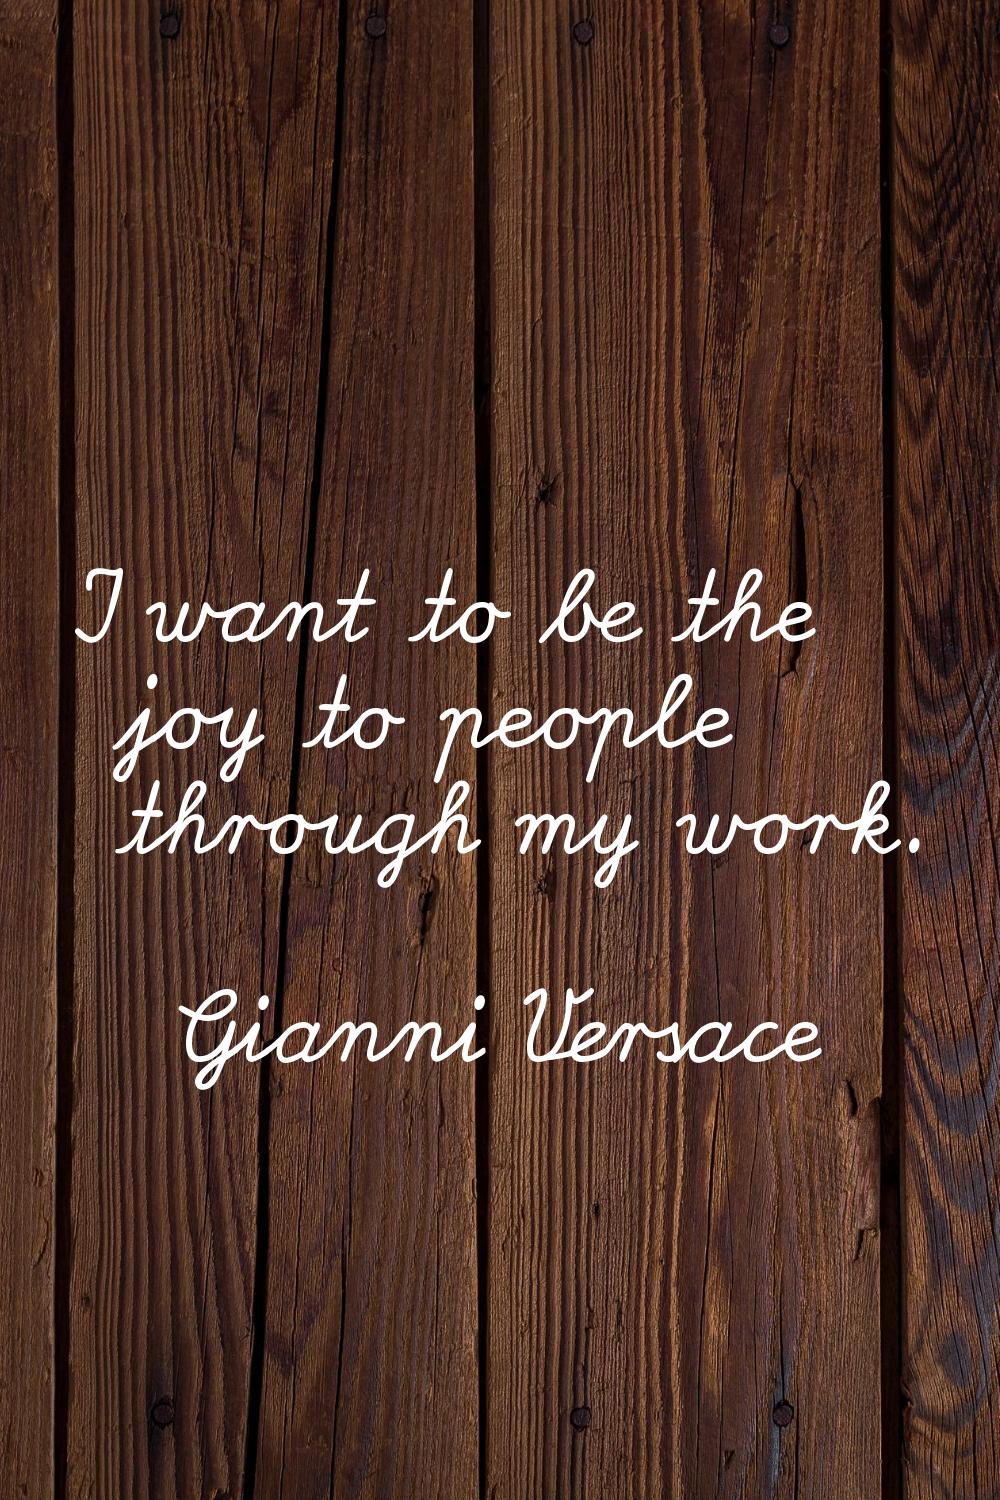 I want to be the joy to people through my work.